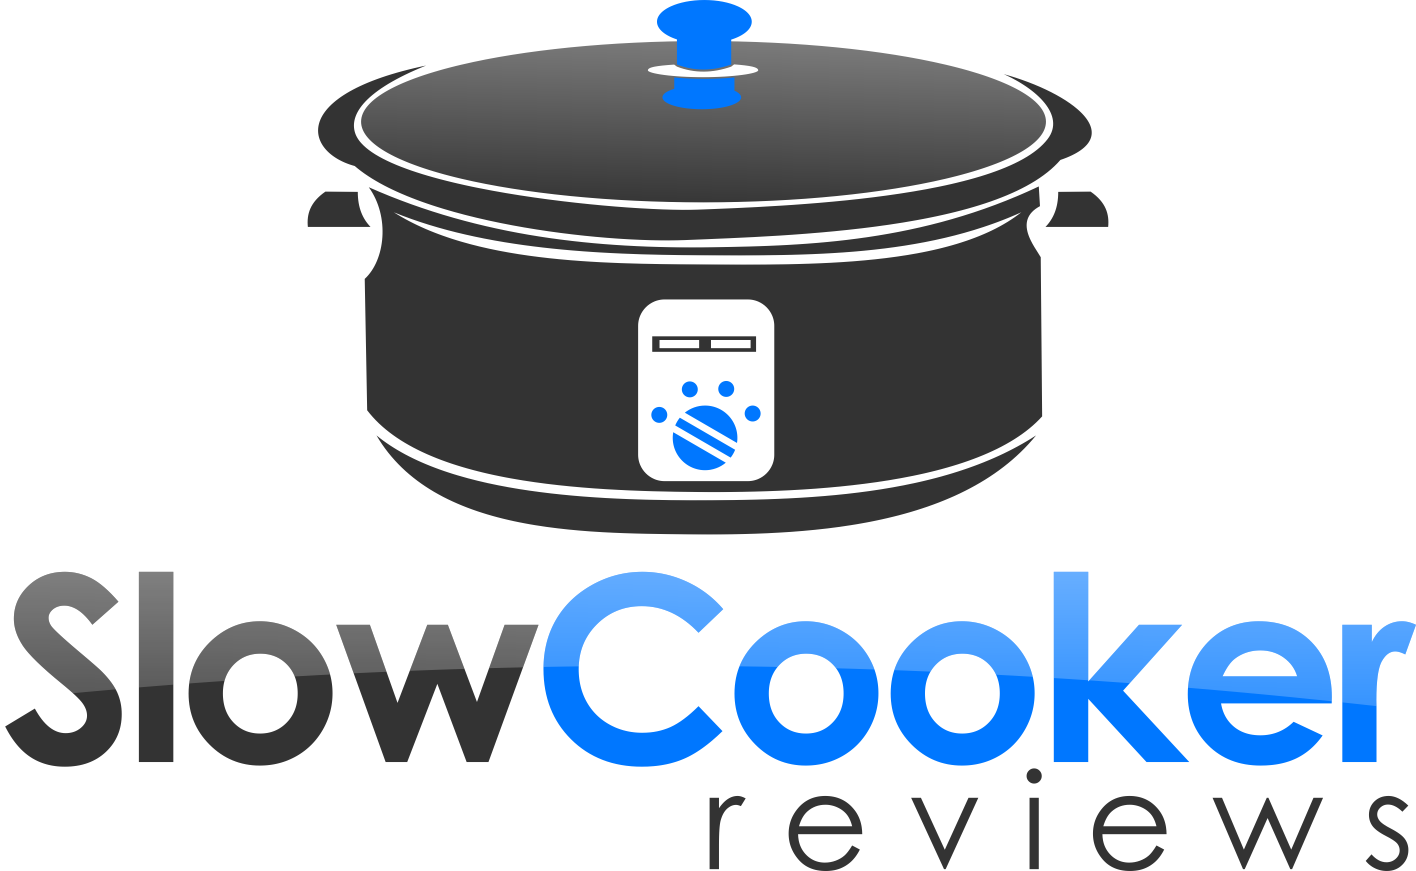 Slow Cooker Be